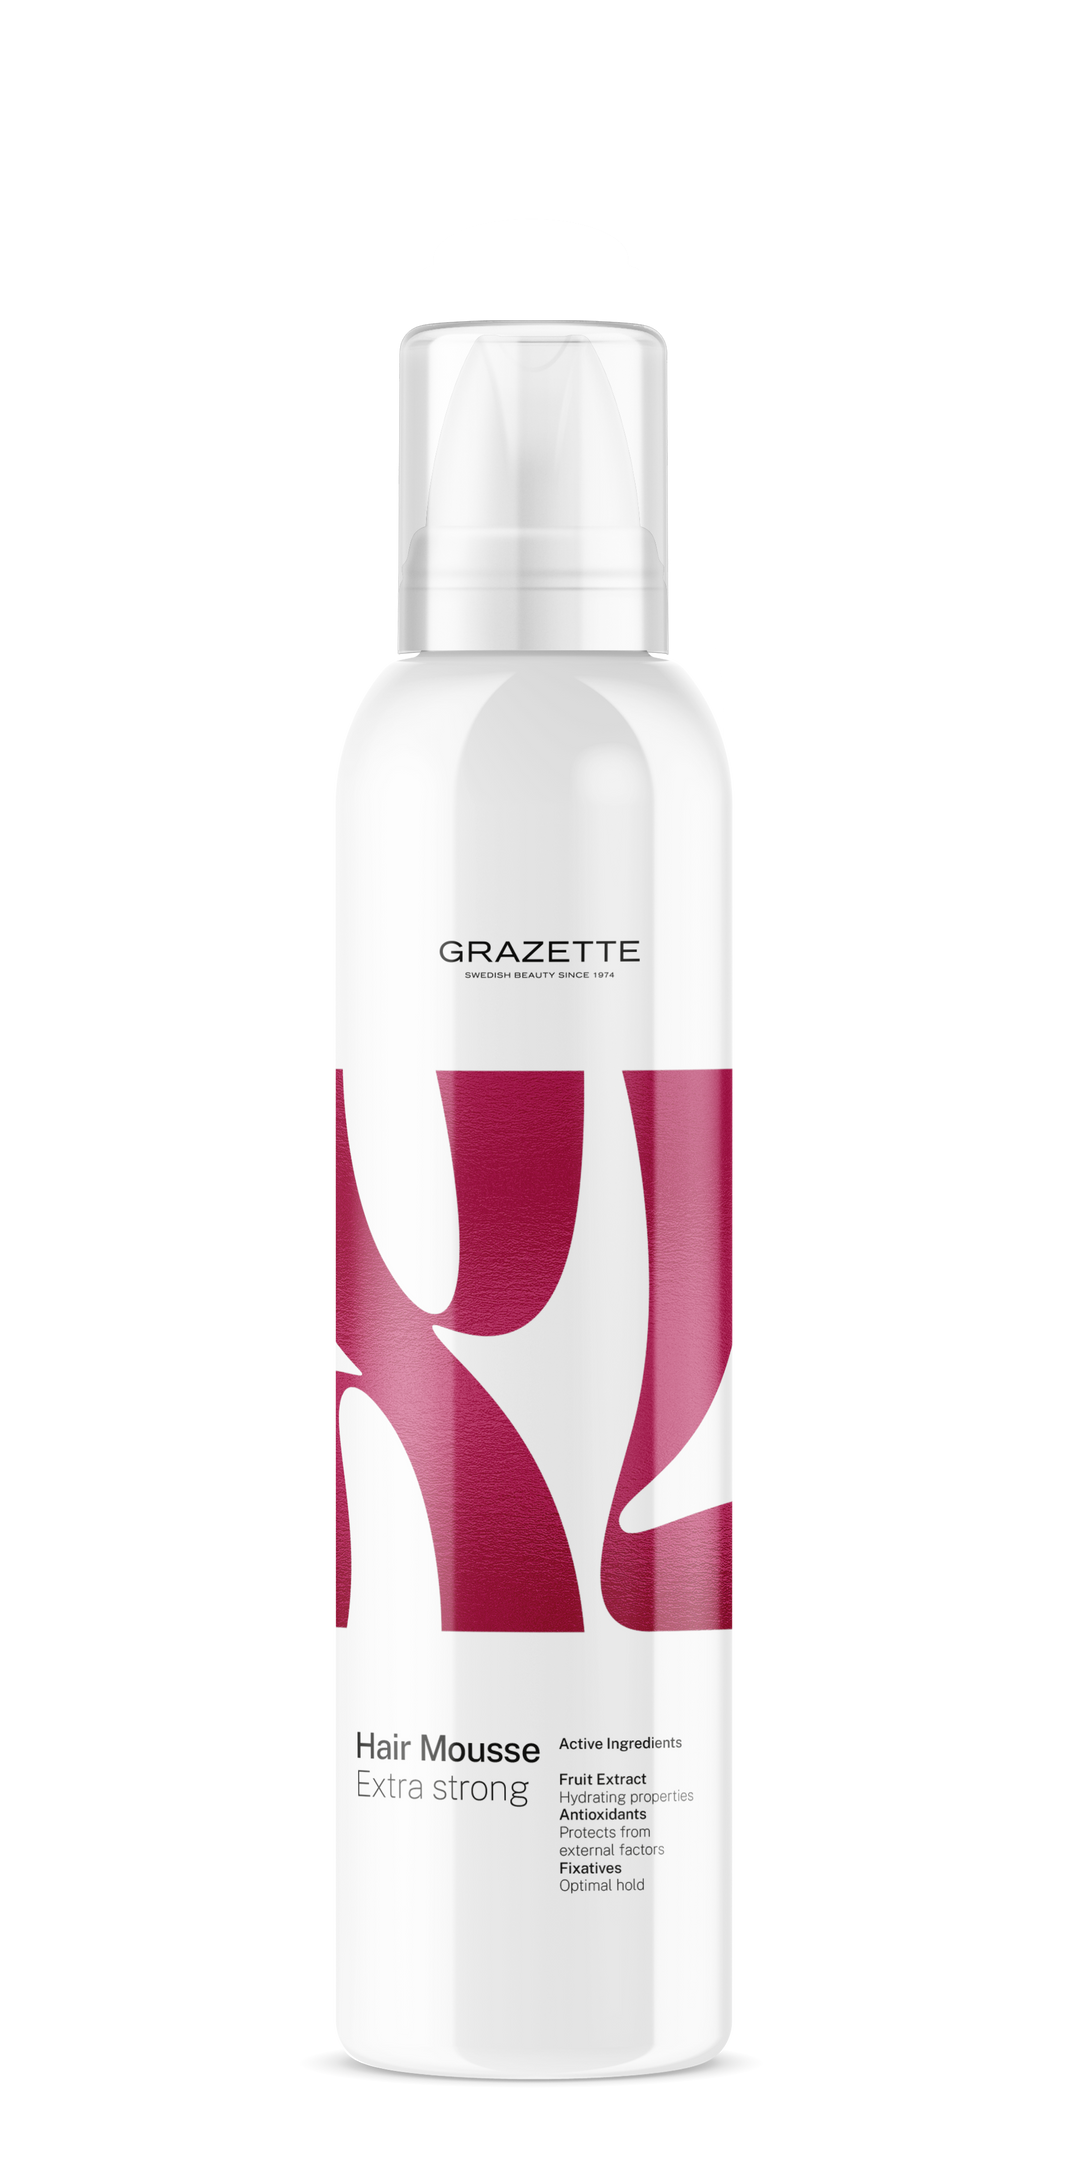 XL HAIR MOUSSE EXTRA STRONG 300ml